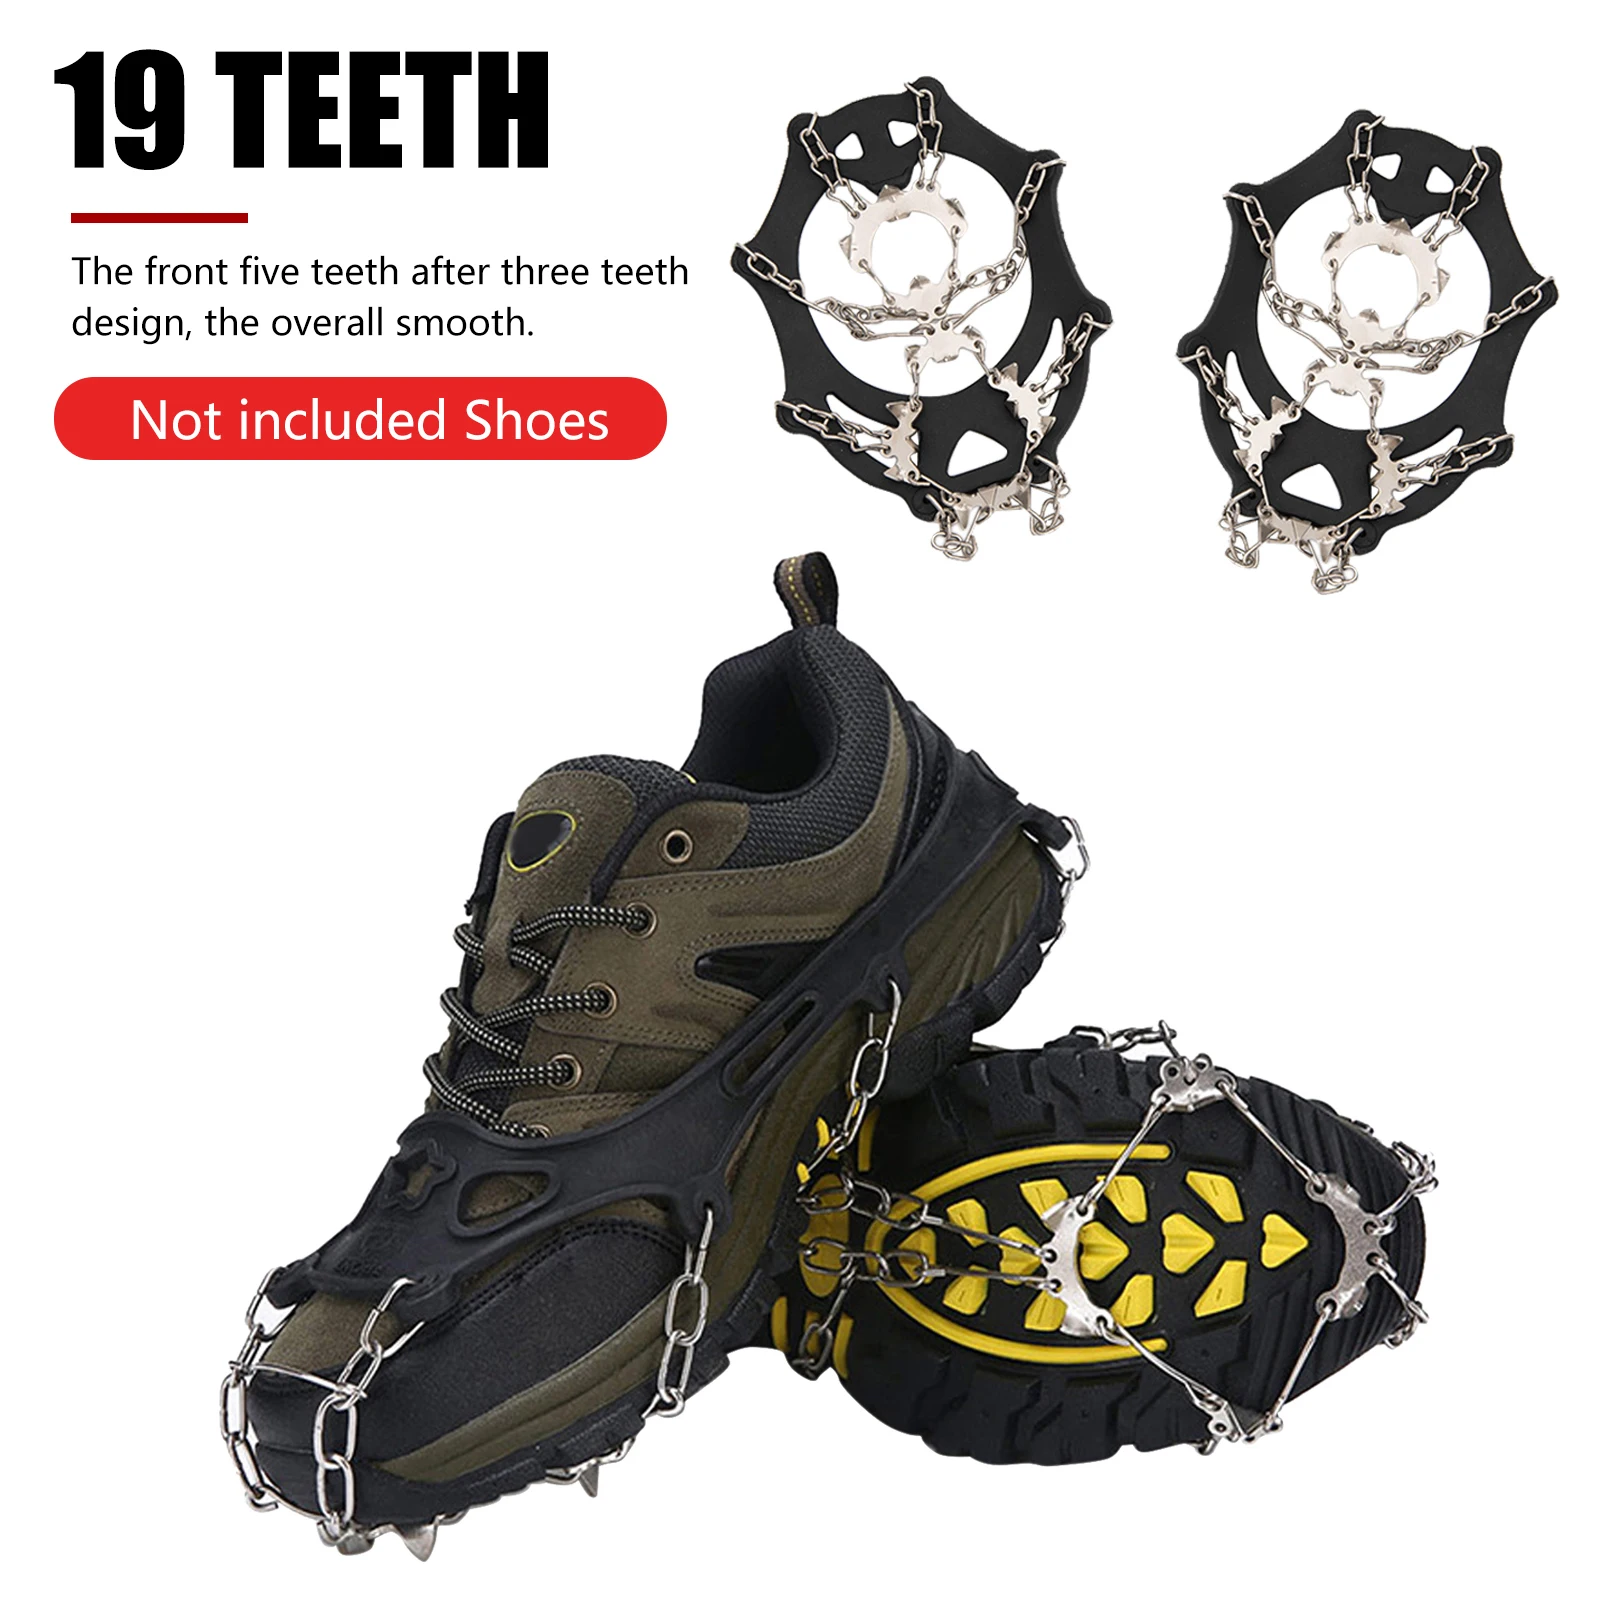 19 Teeth Ice Snow Shoes Spike Grip Boots Chain Crampons Grippers Anti-Slip Cover 